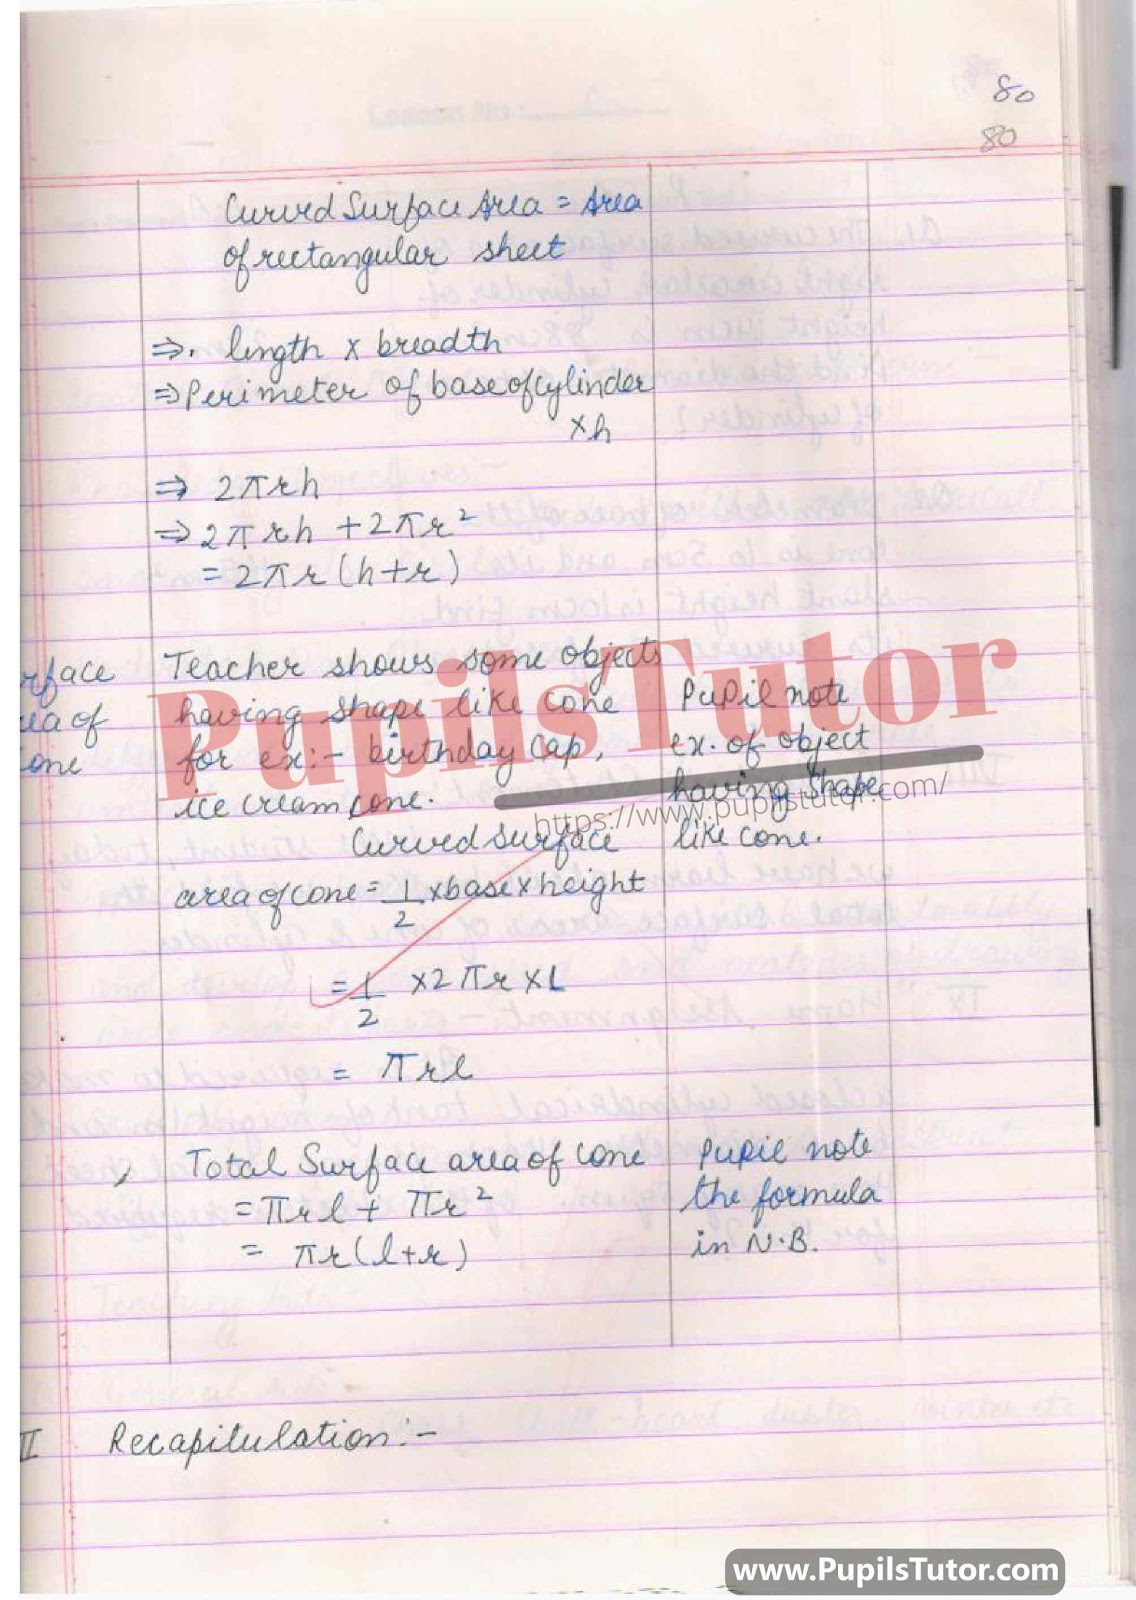 Lesson Plan On Surface Area Of Cone And Cylinder For Class 8th, 9th And 10th.  – [Page And Pic Number 5] – https://www.pupilstutor.com/